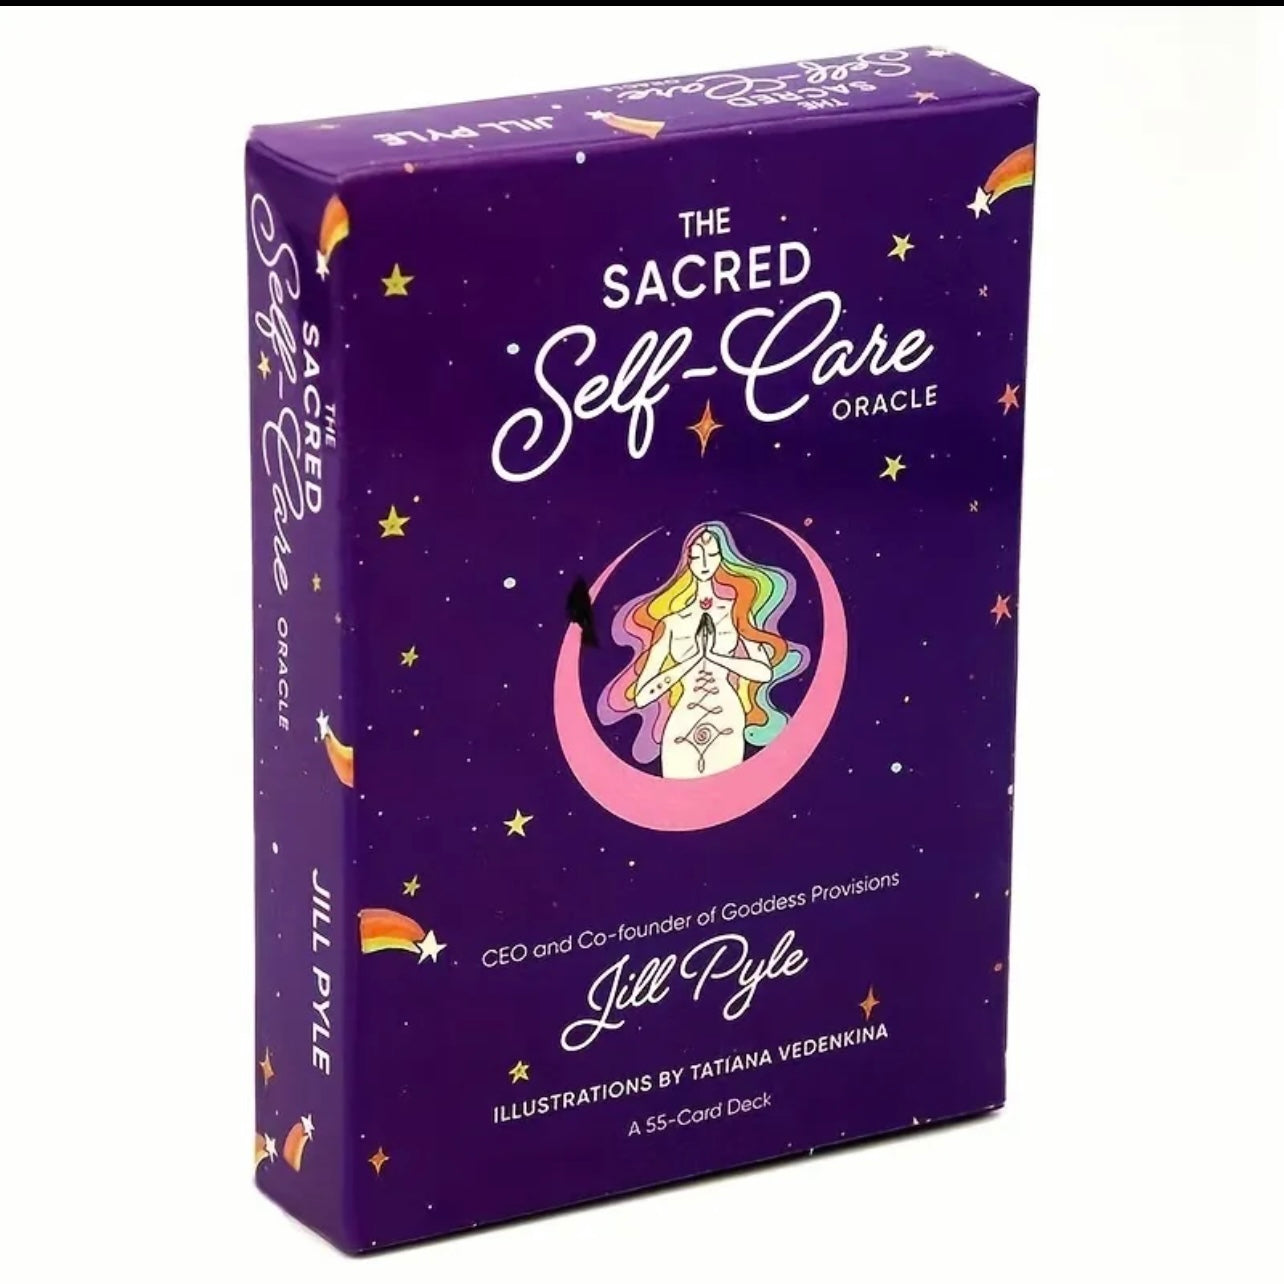 The Sacred Self-Care Oracle cards